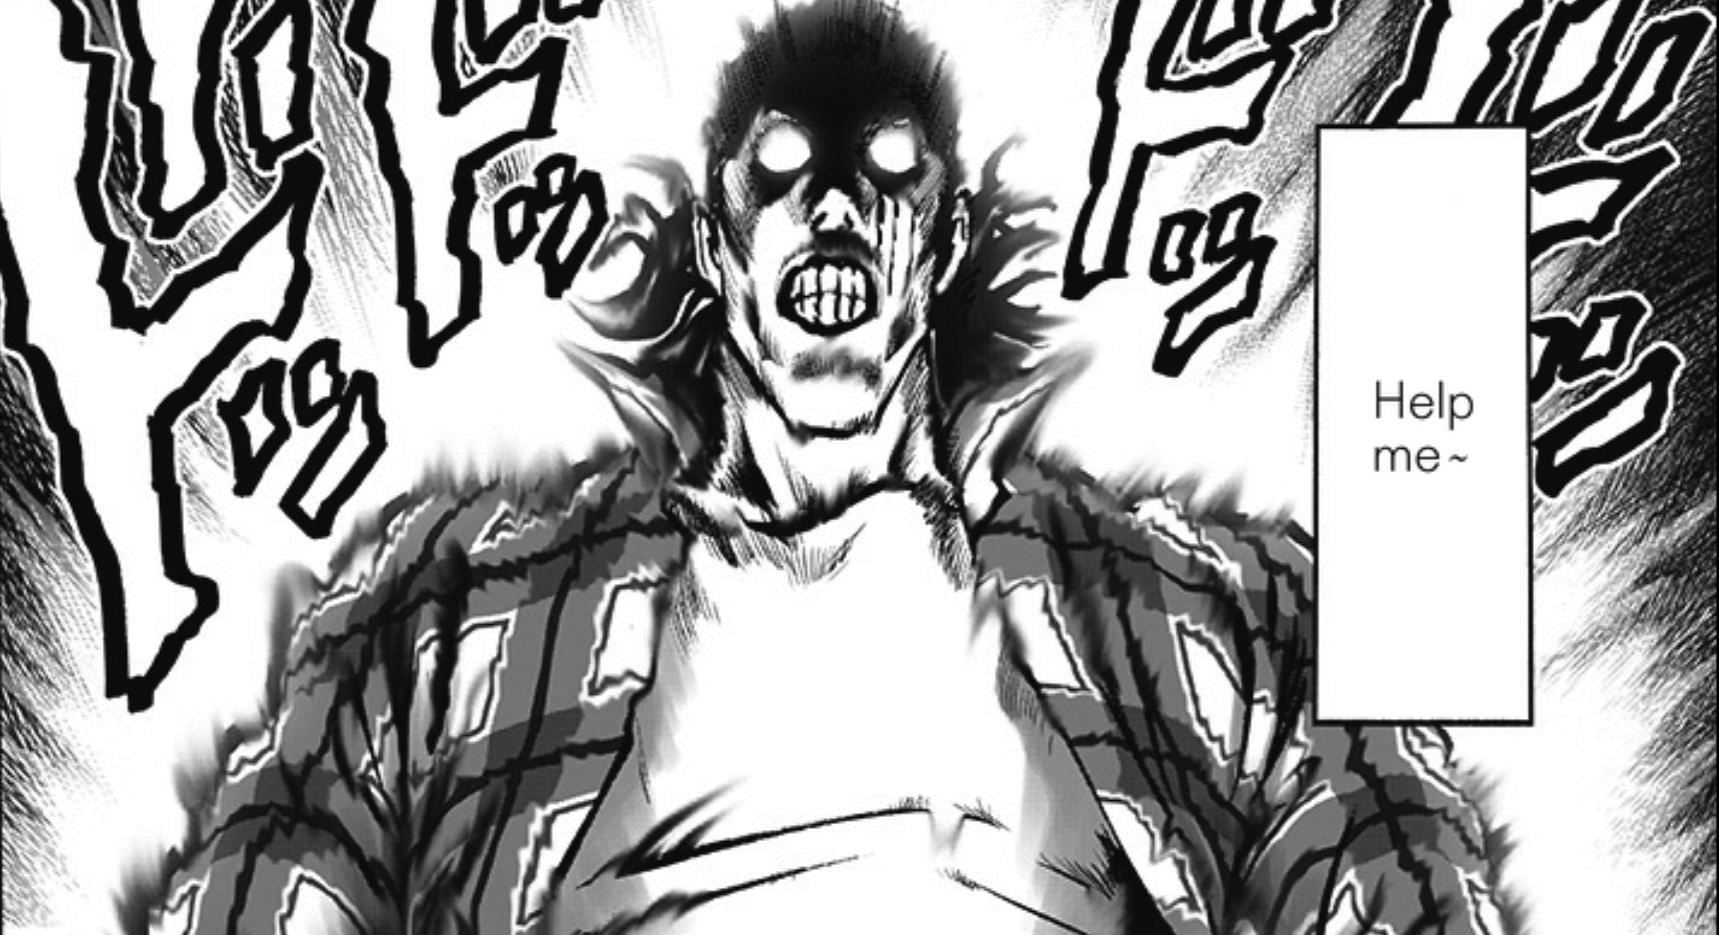 King in One Punch Man chapter 189 (Image via Shueisha)